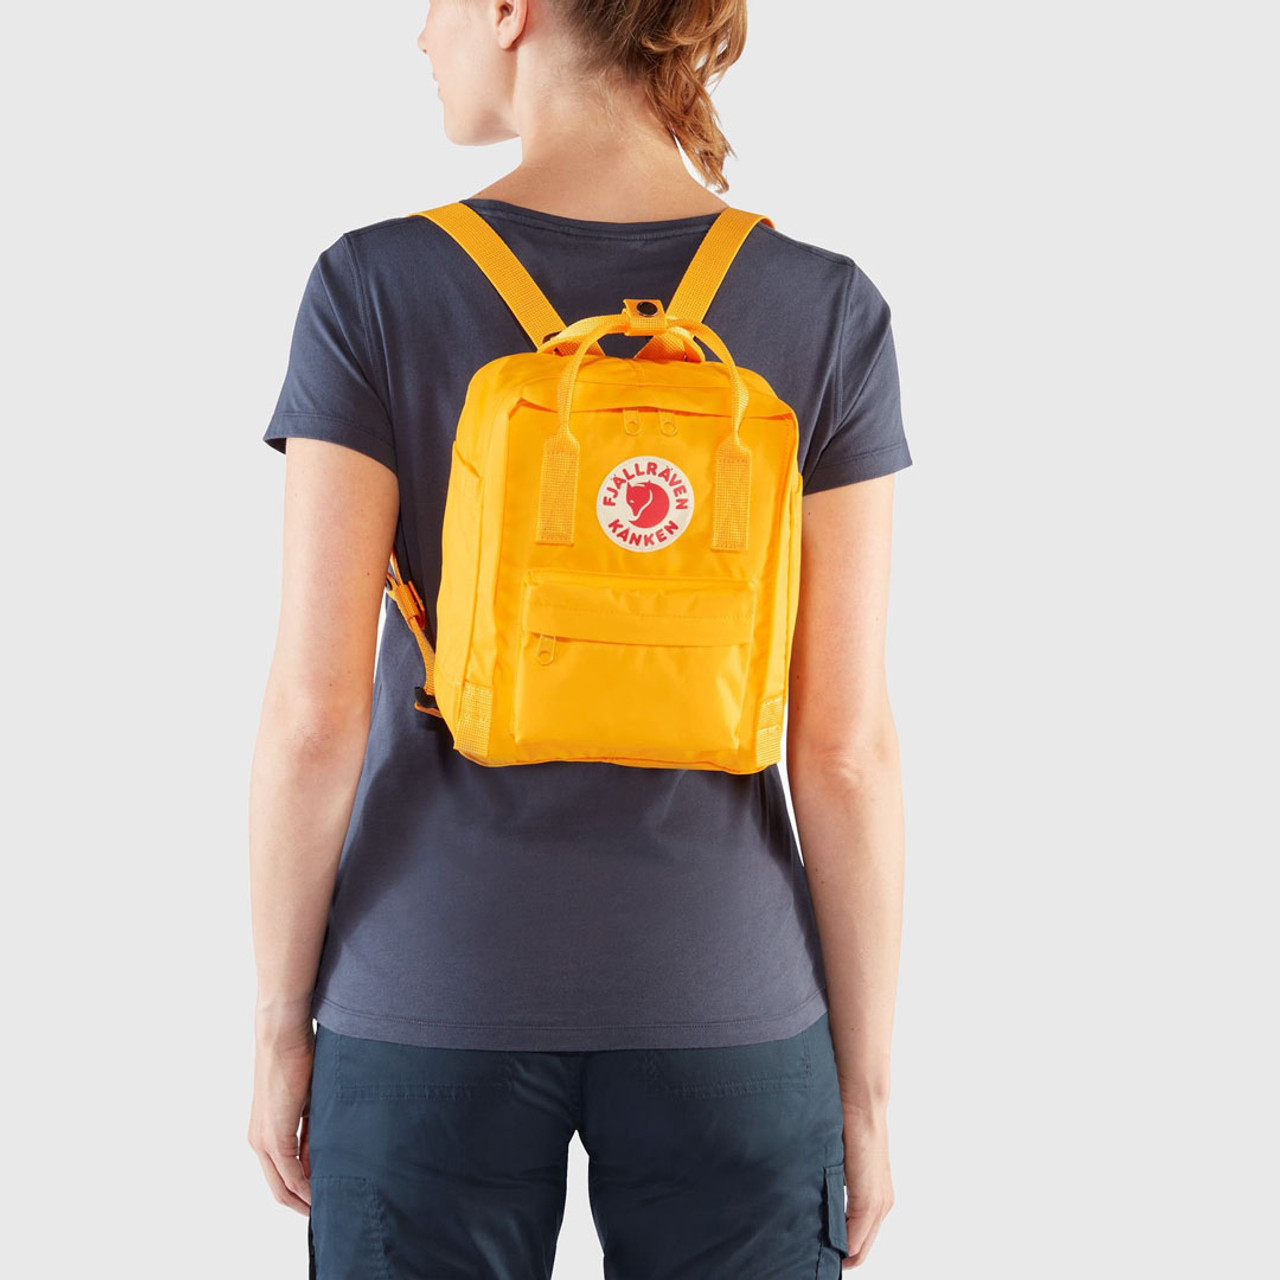 Fjallraven Kanken Classic vs Mini Backpack (what you need to know) 